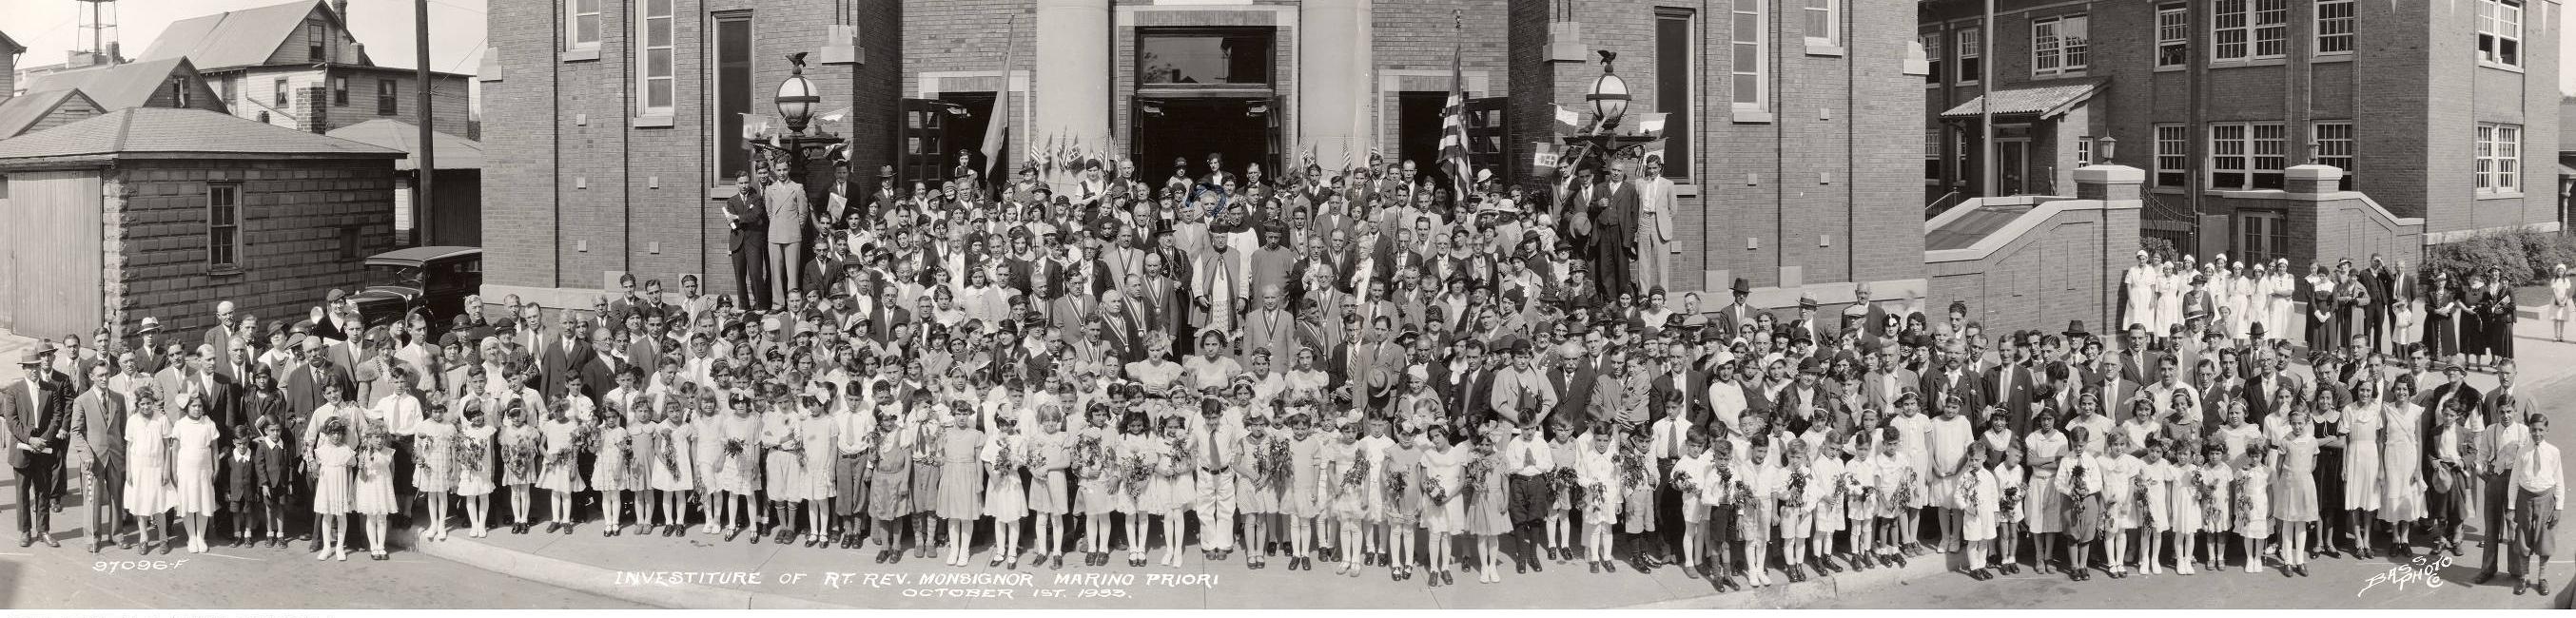 A large group of people gather outside a church for a group portrait.